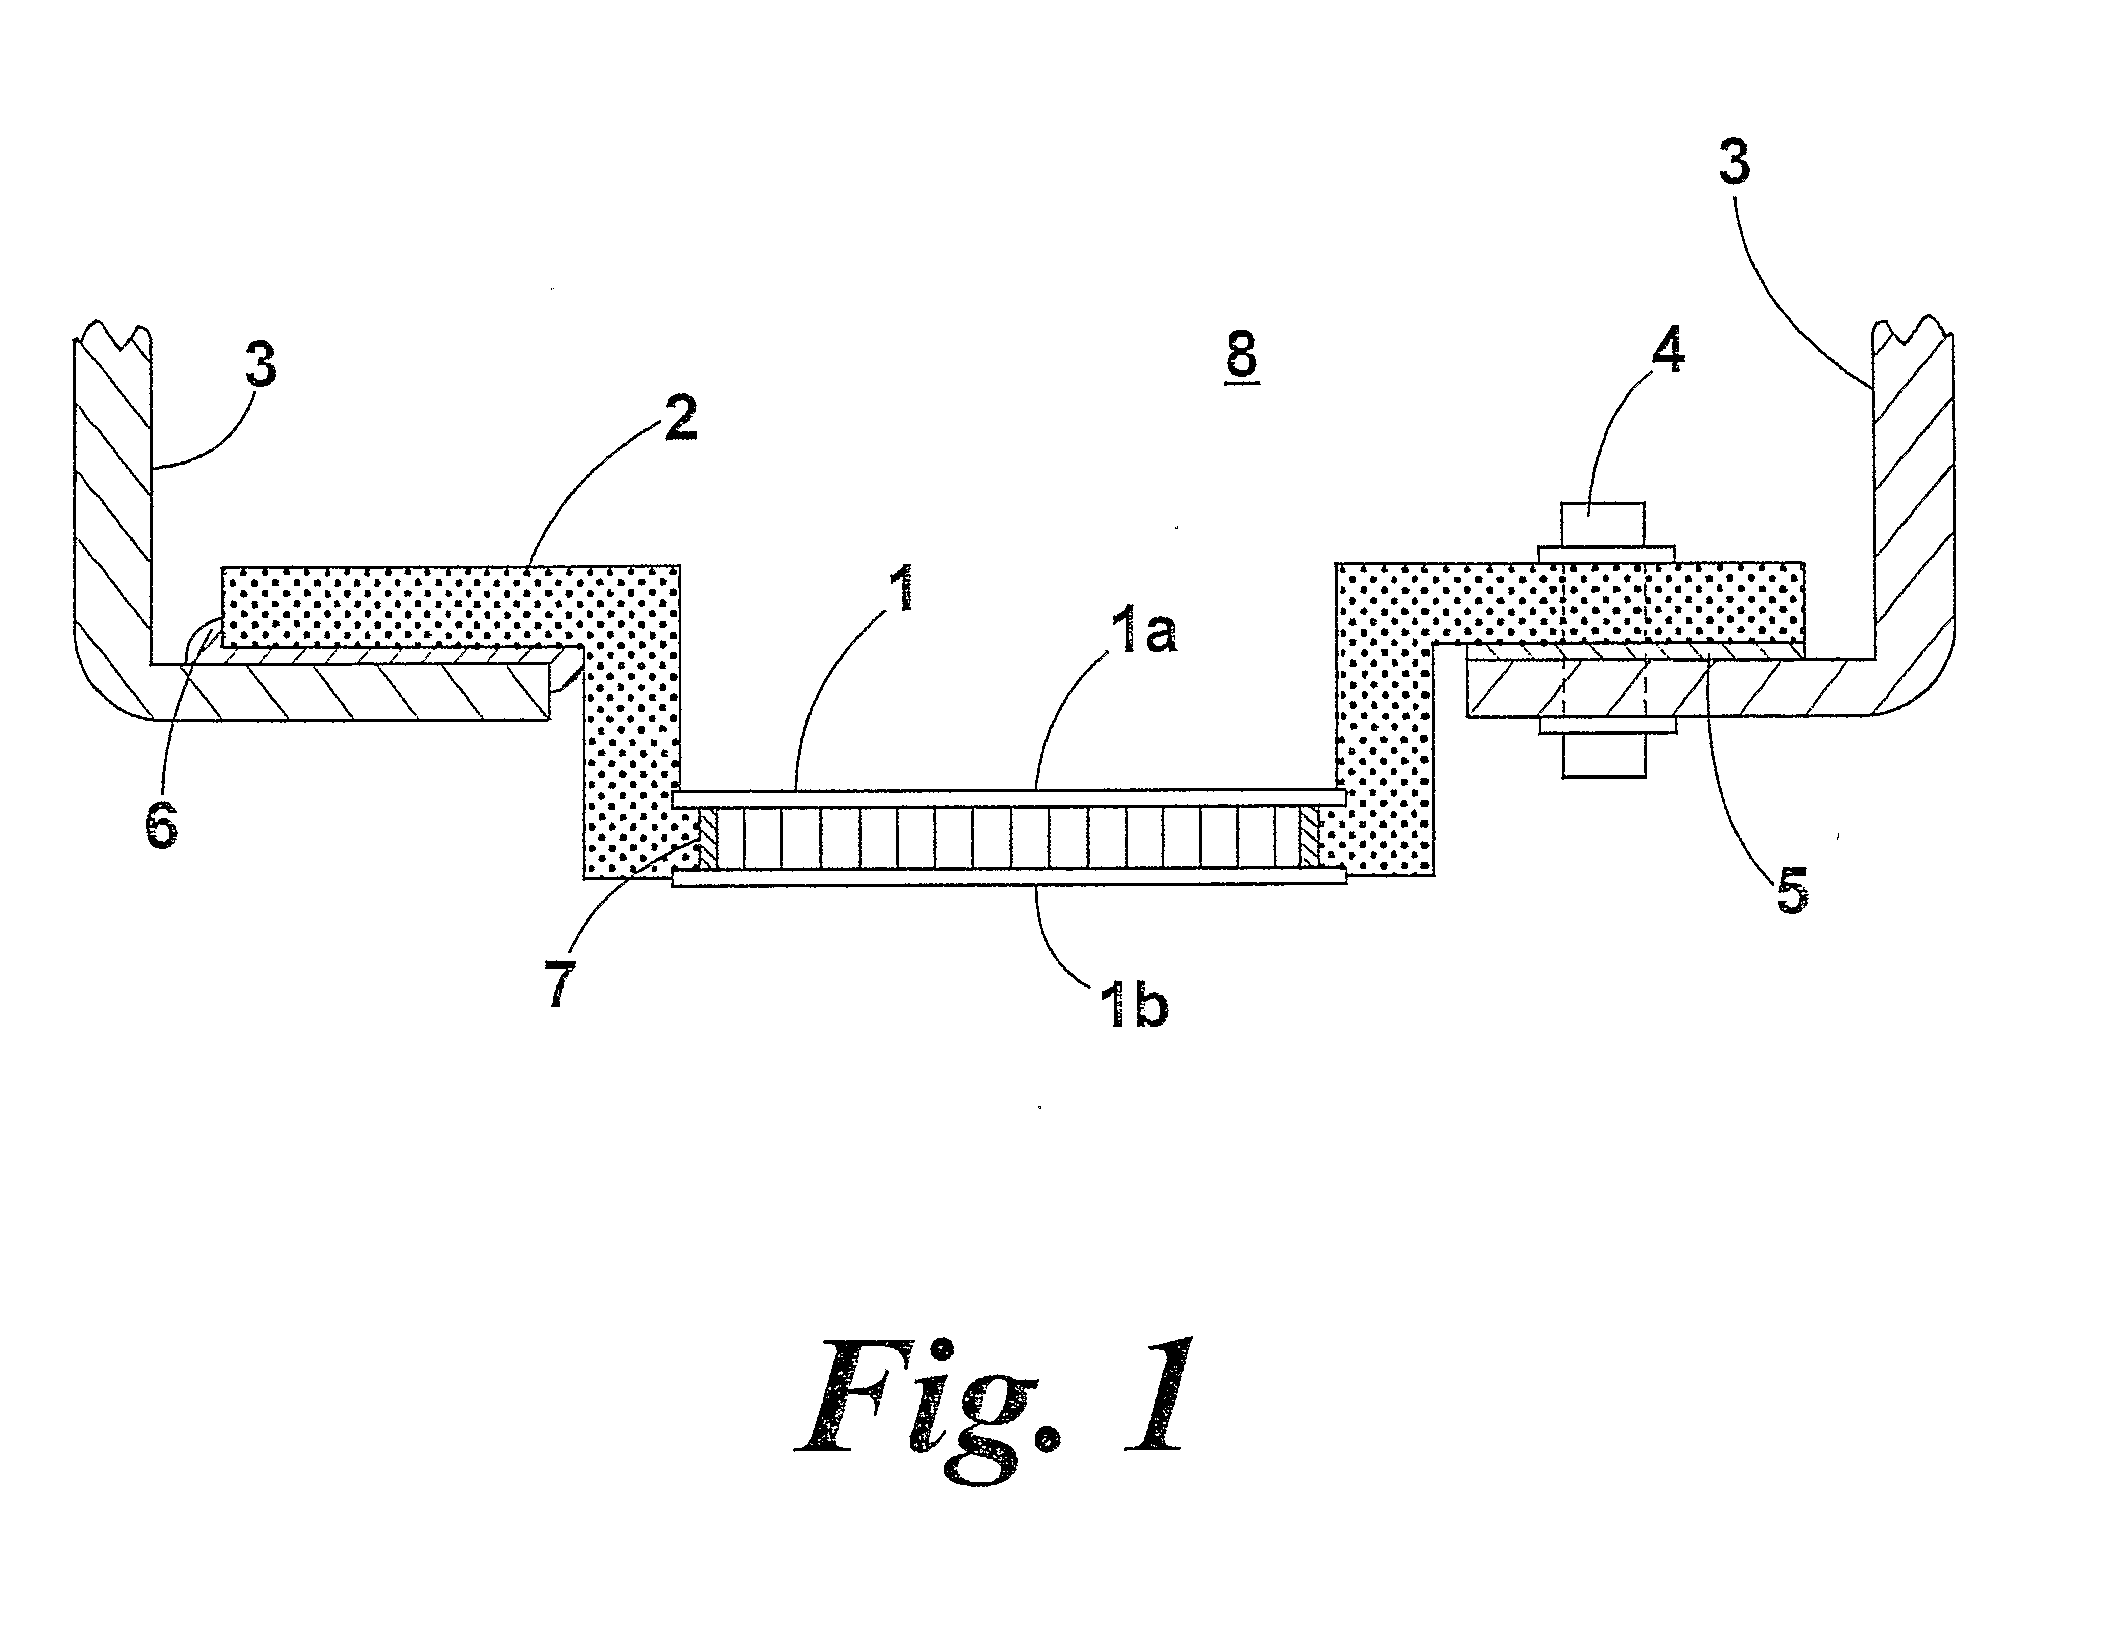 Thermoelectric refrigerating device